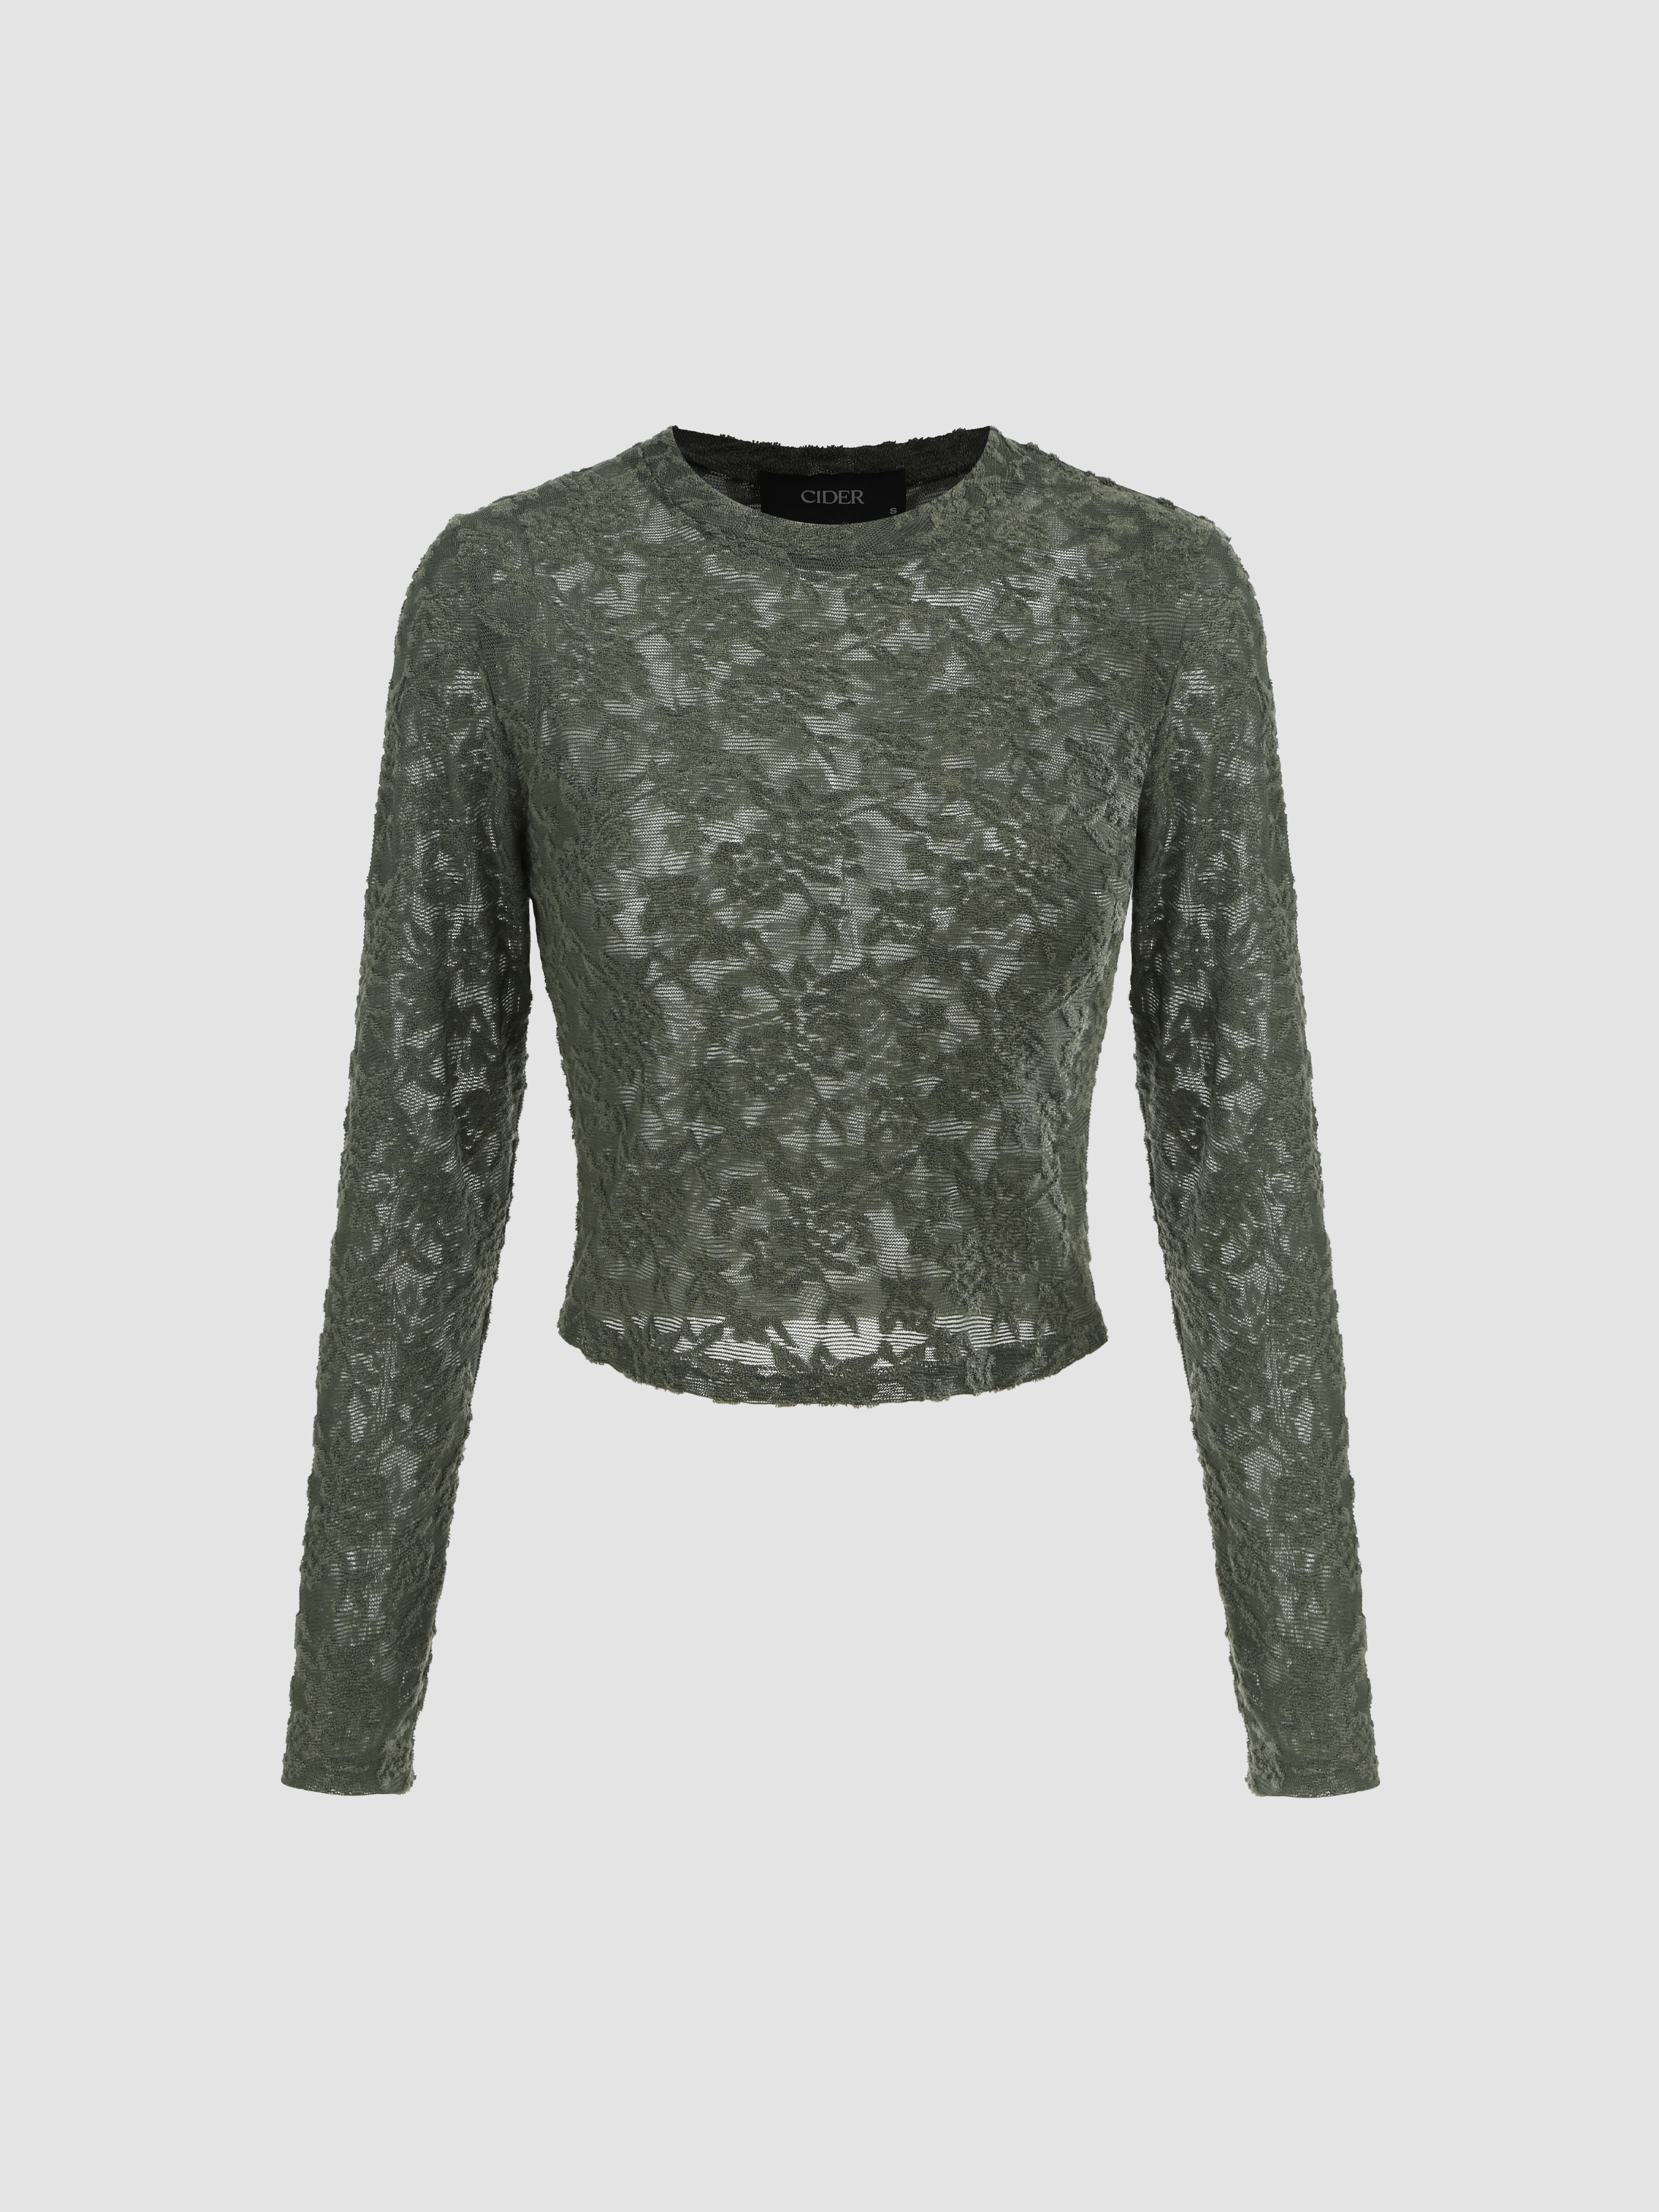 Jacquard Round Neckline Floral Long Sleeve Top